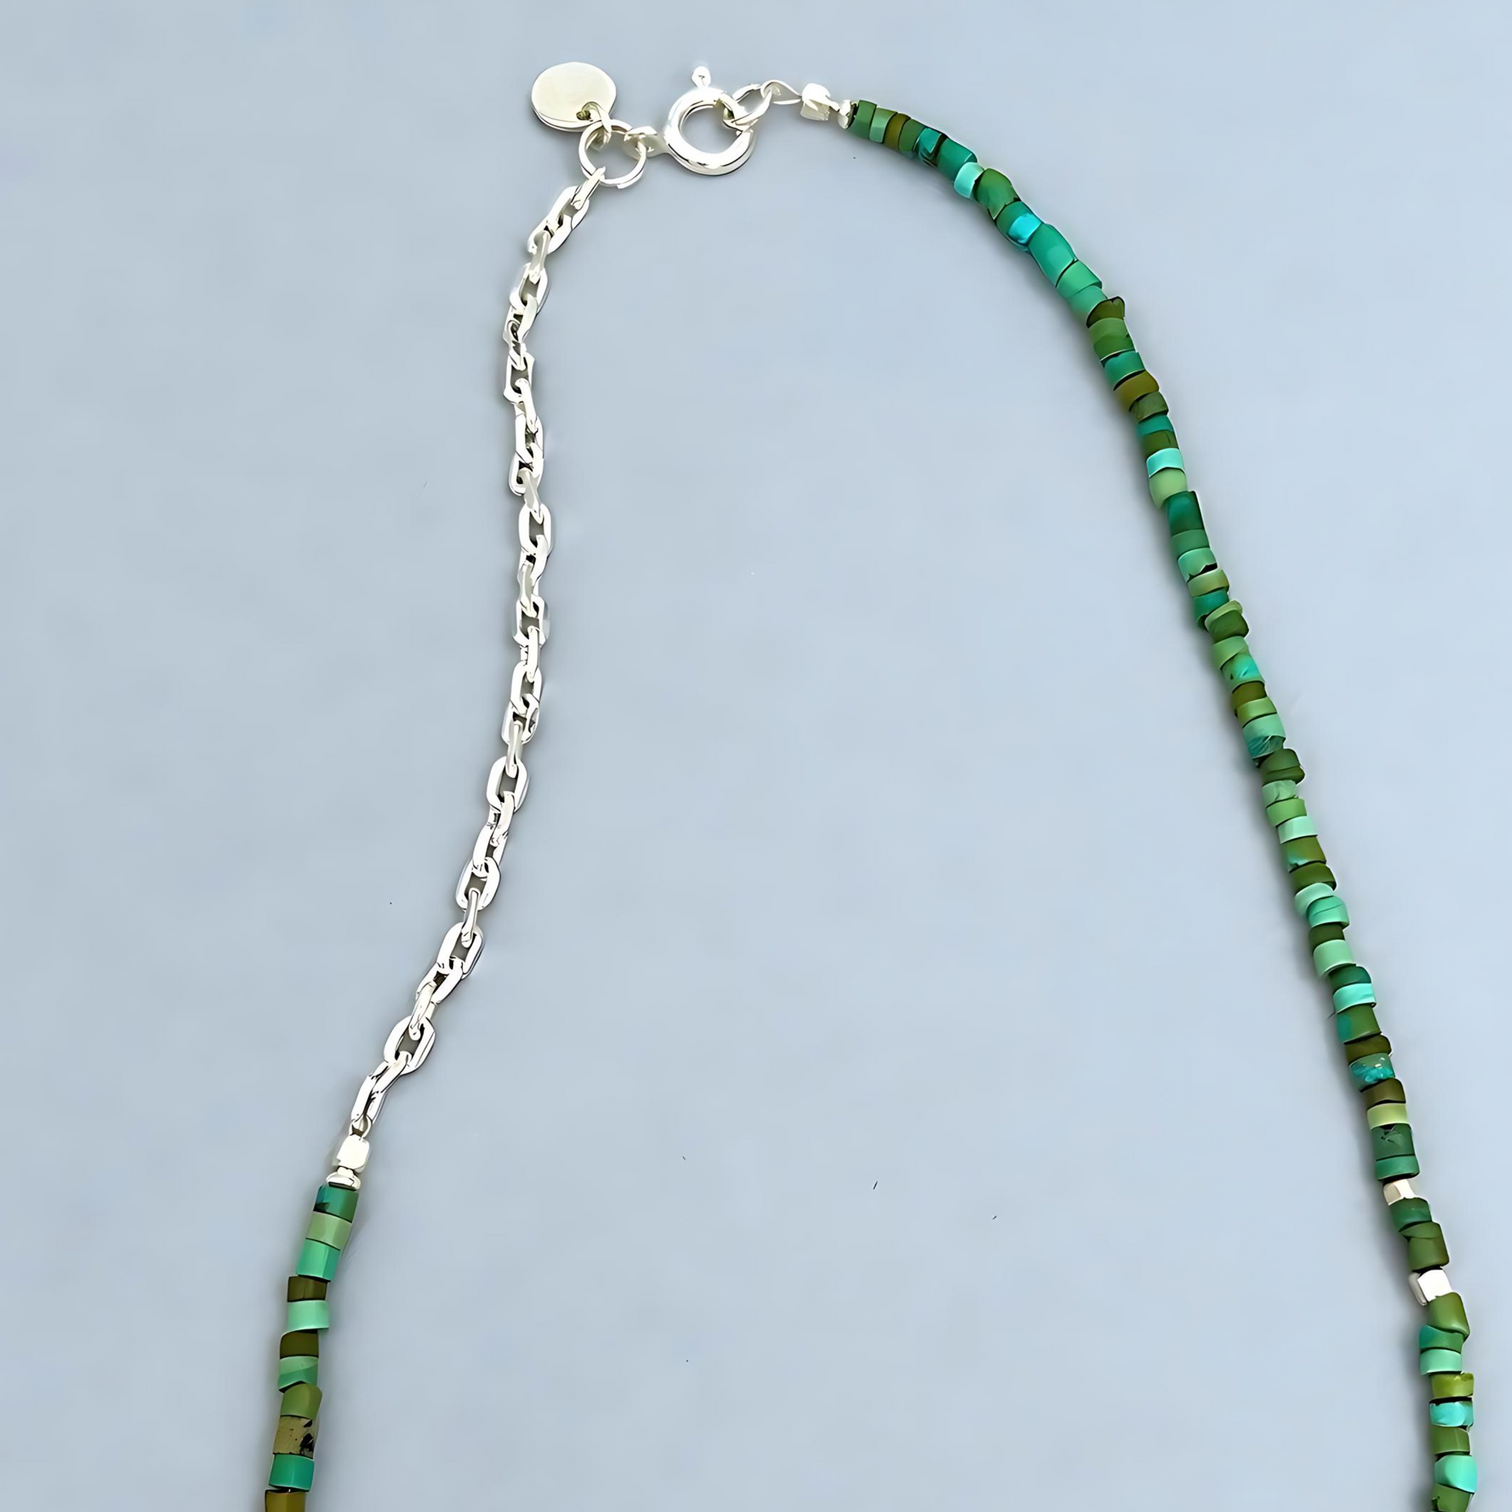 Trendy Necklace, Turquoise and a silver Chain. Detail shot of silver chain.